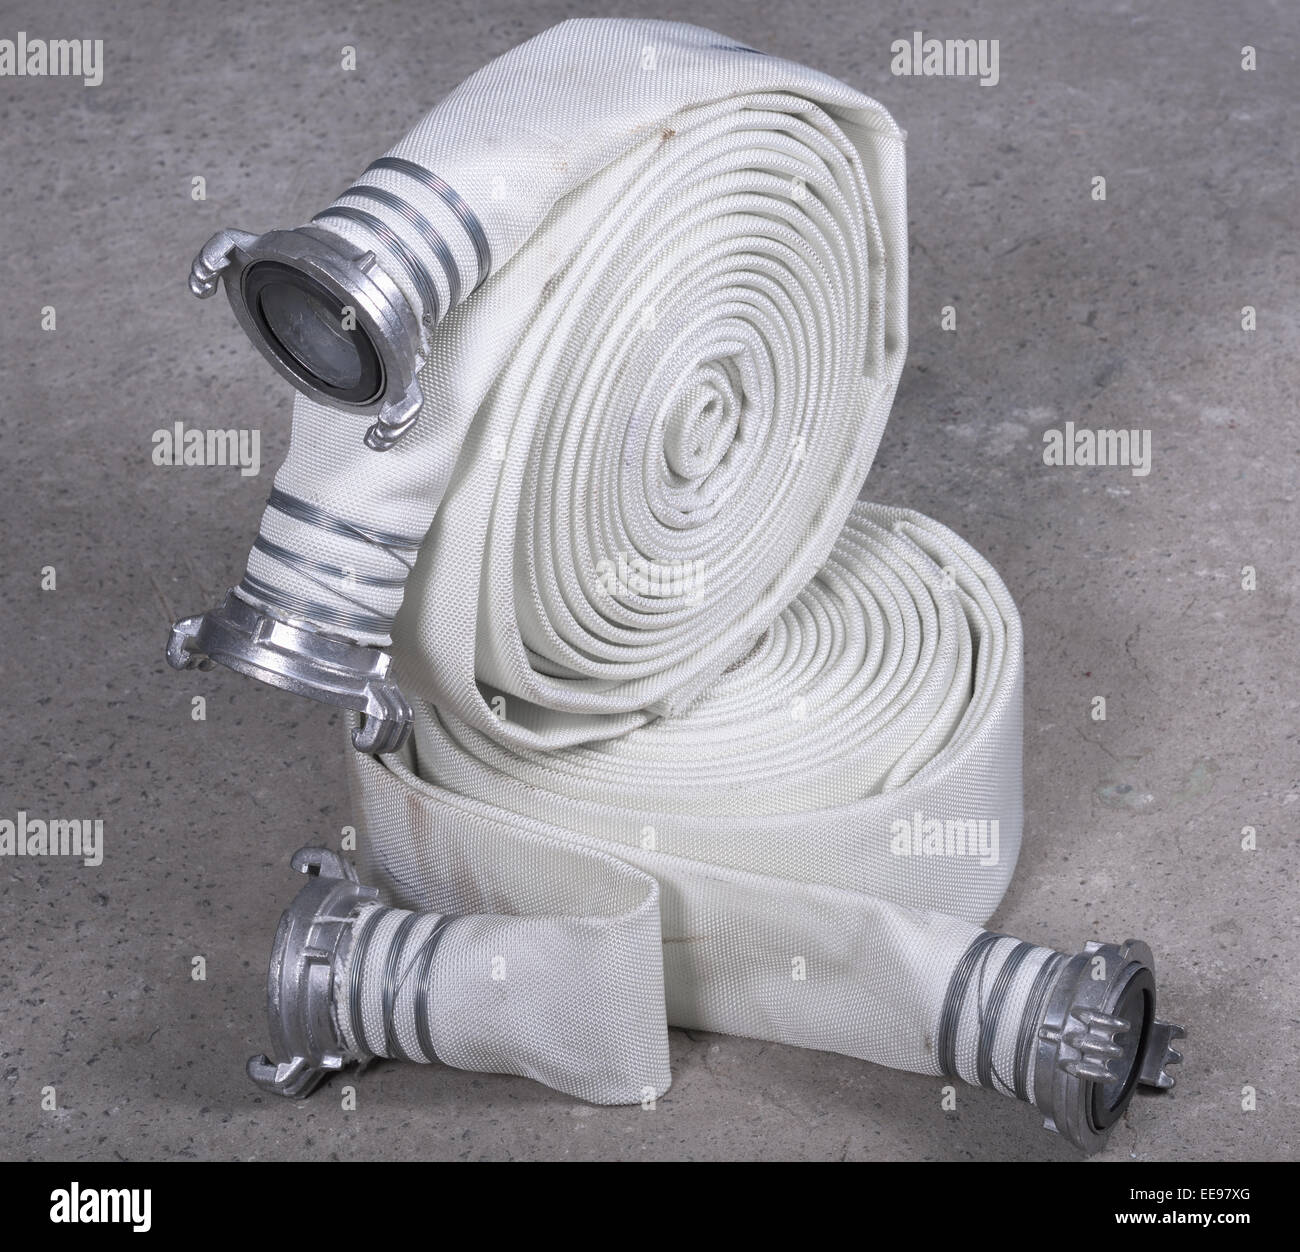 Two fire hose to work at a pressure Stock Photo